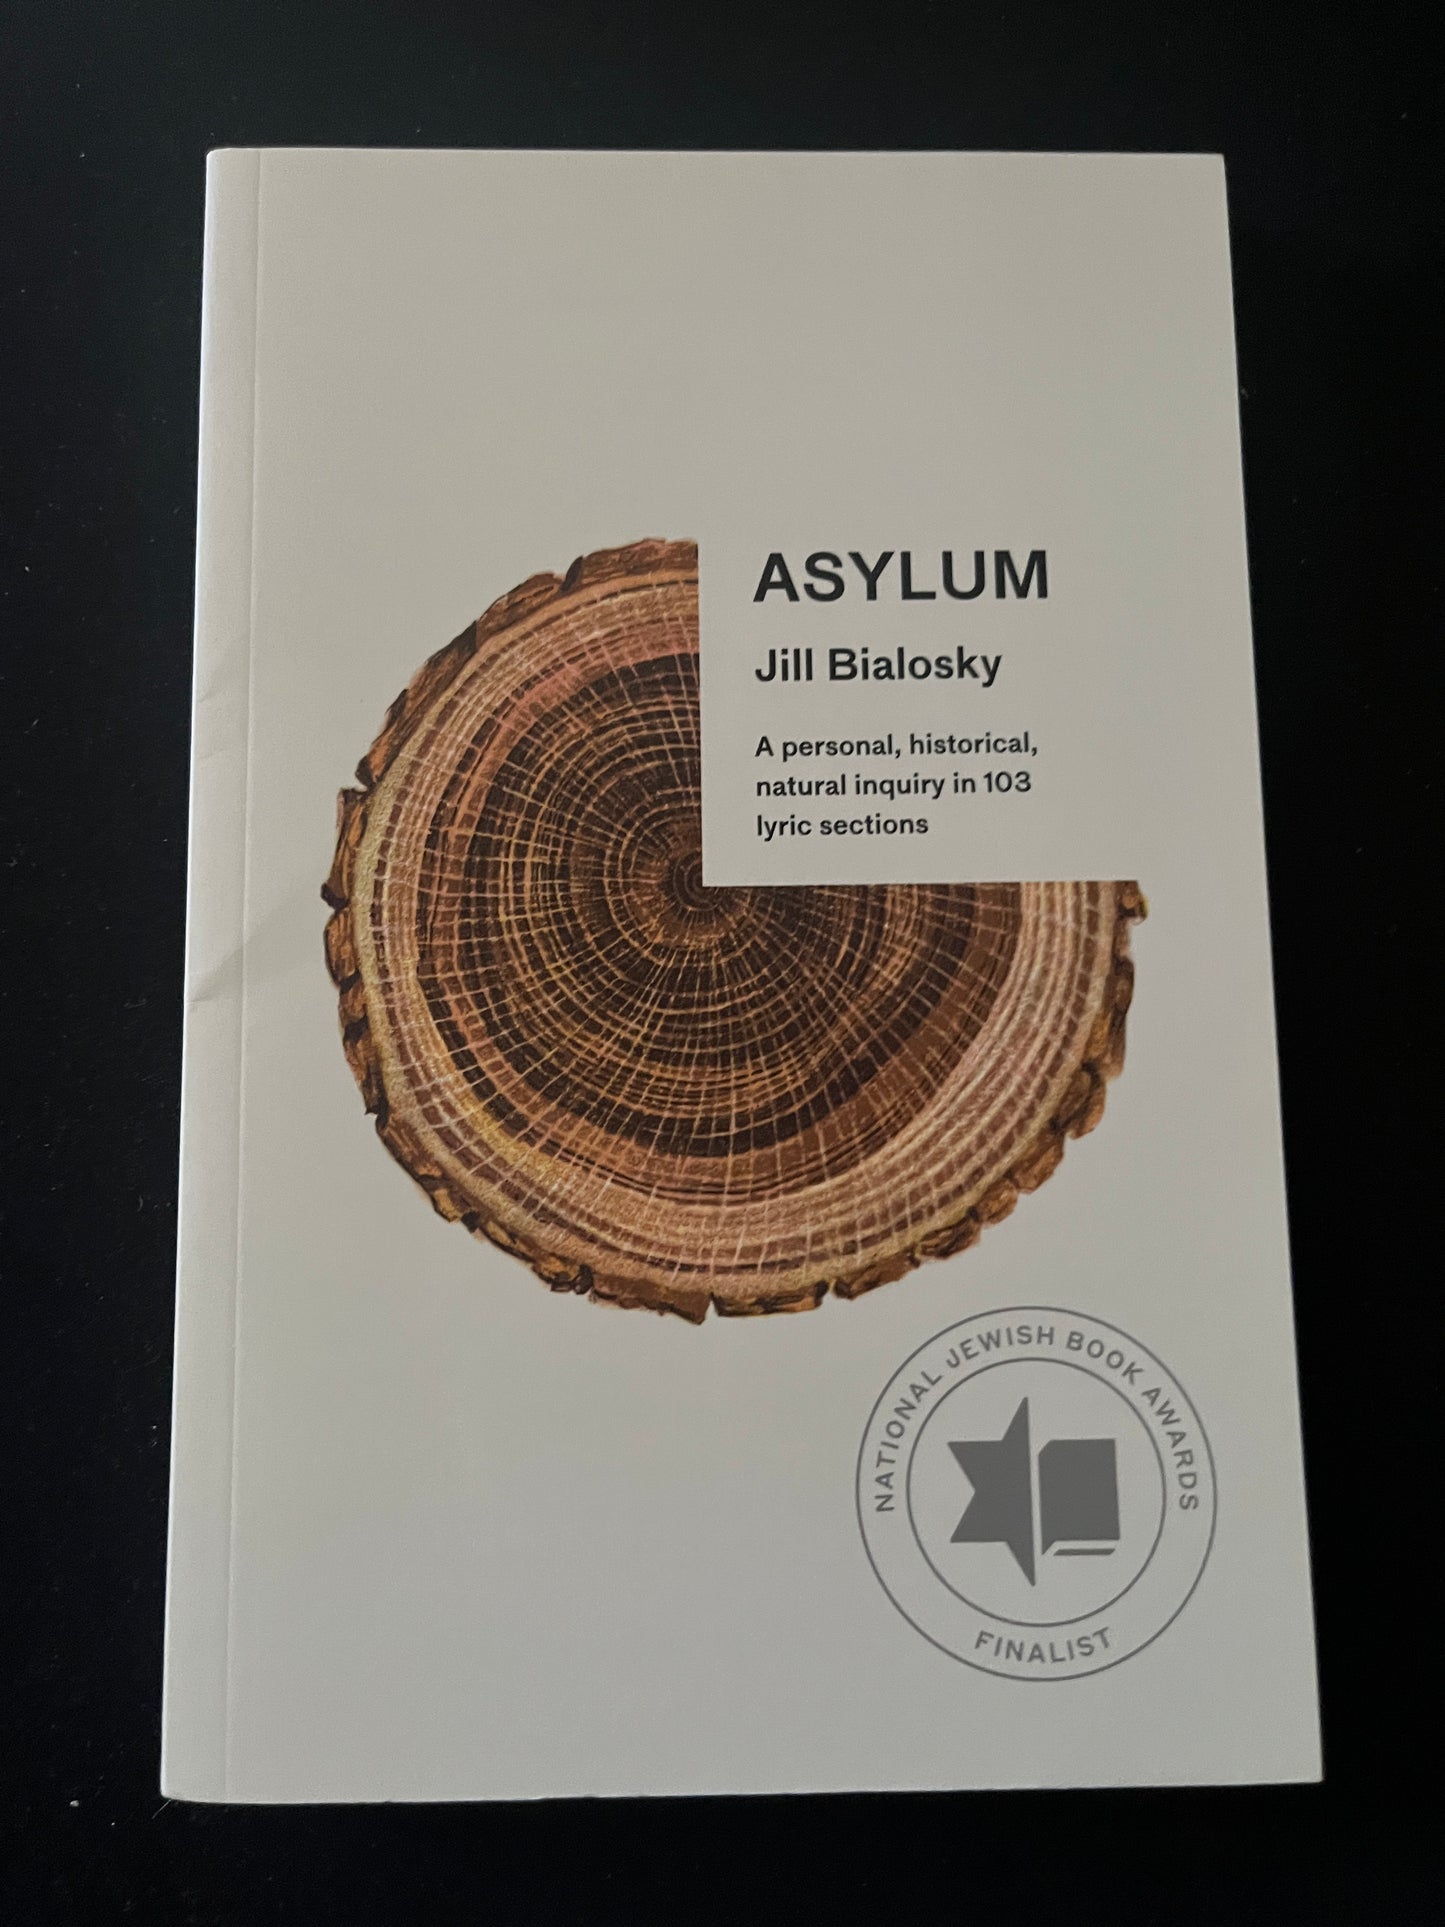 ASYLUM: A personal, historical, natural inquiry in 103 lyric sections by Jill Bialosky